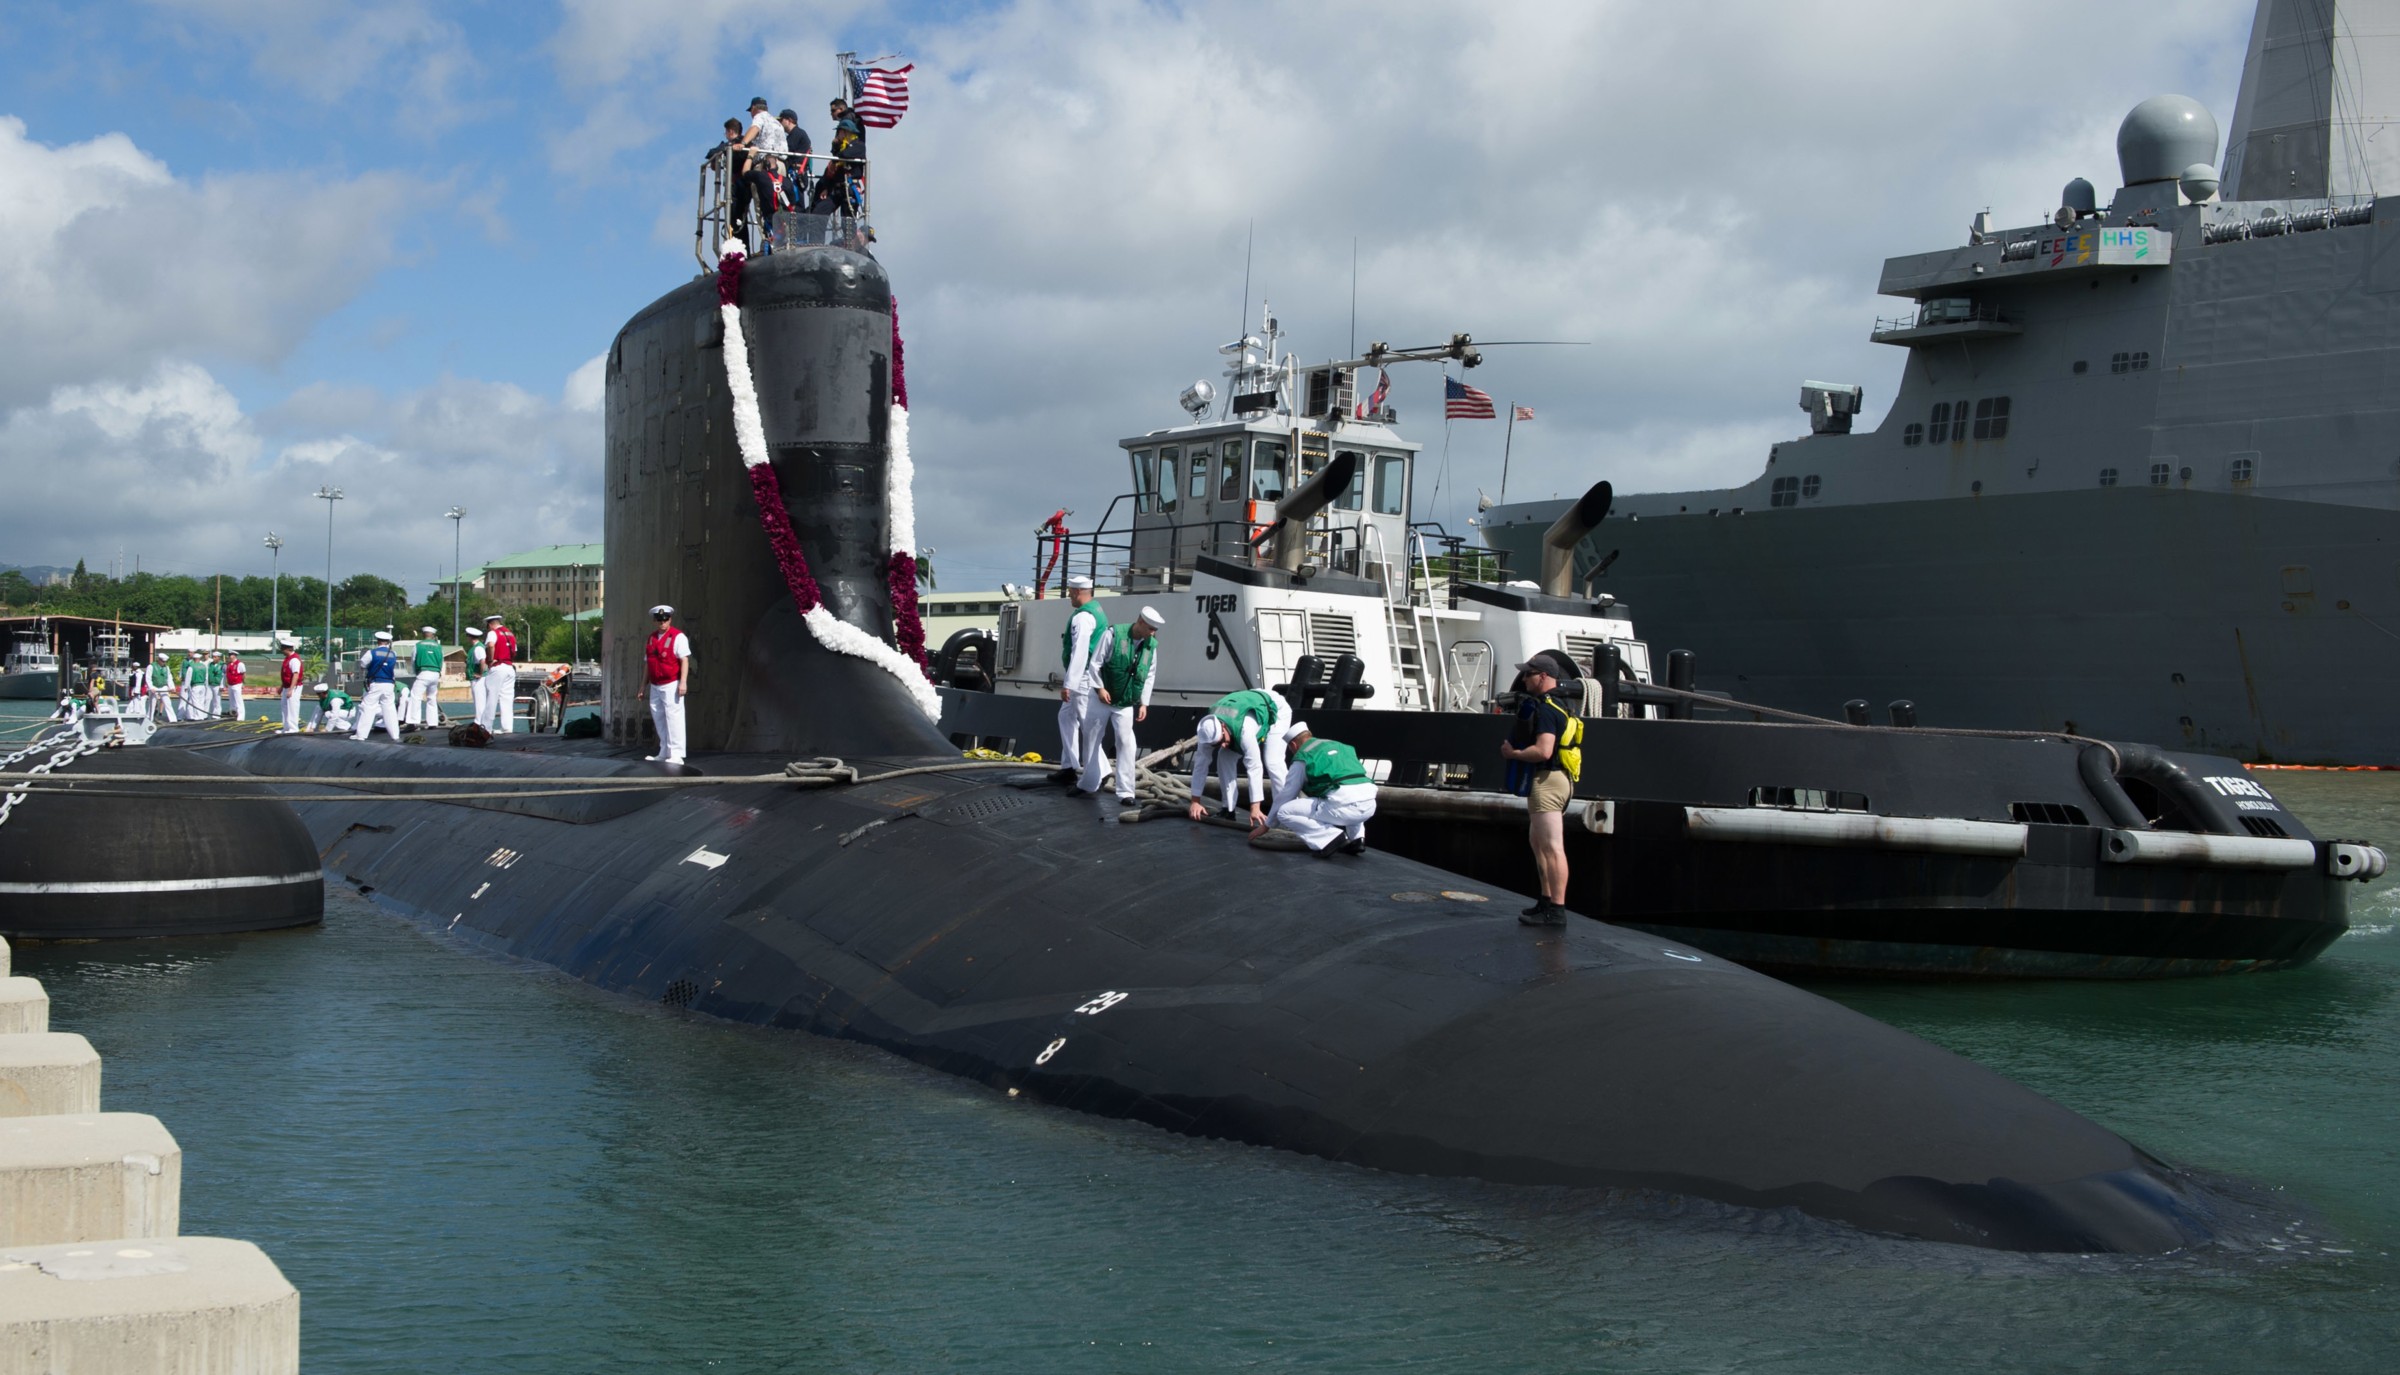 ssn-782 uss mississippi virginia class attack submarine us navy 03 joint base pearl harbor hickam